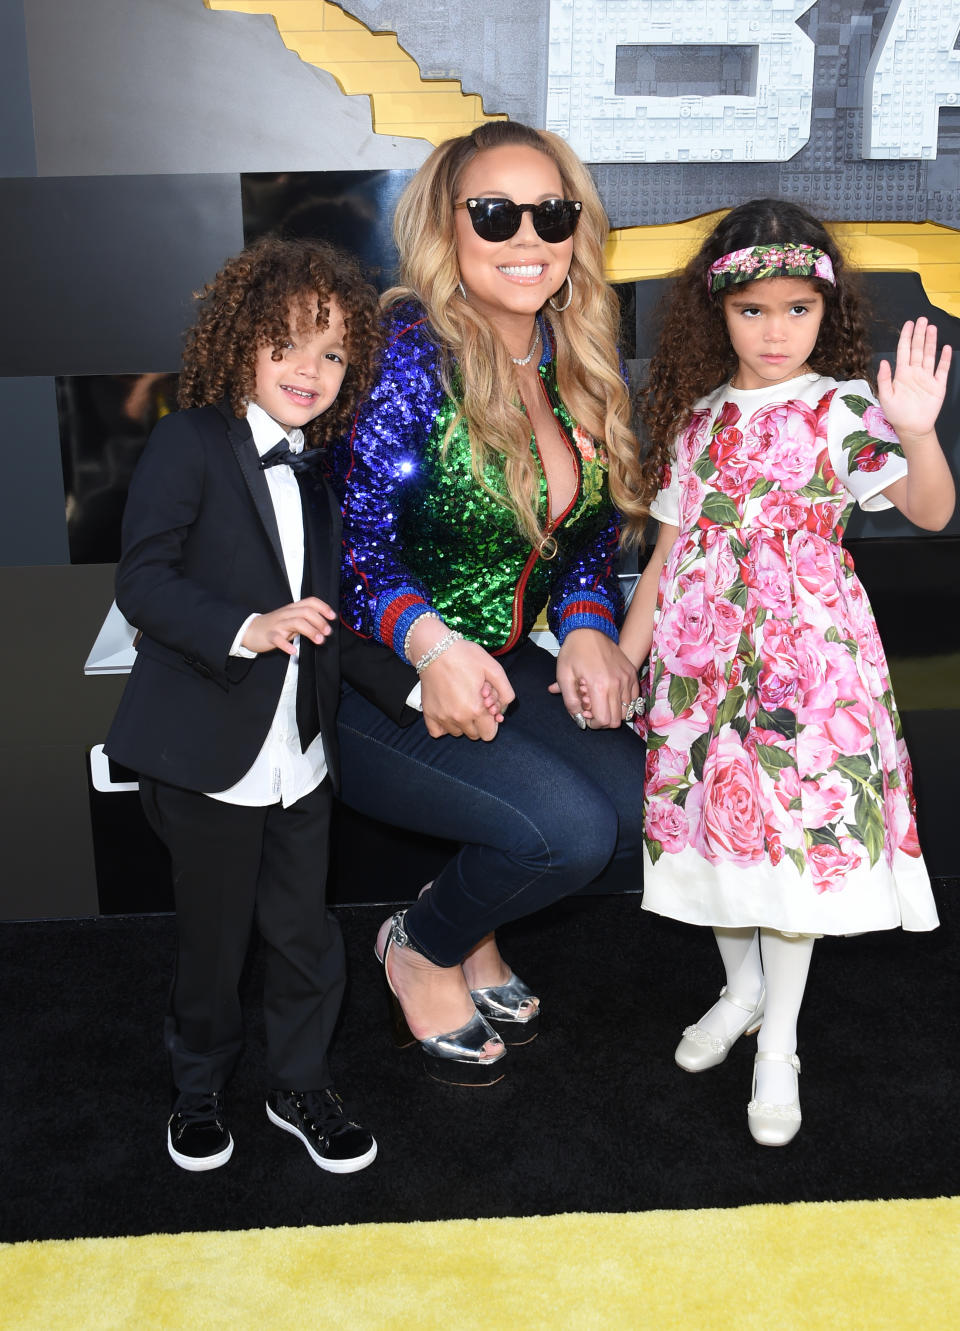 Singer Mariah Carey and children Morrocco and Monroe attend the Los Angeles premiere of The Lego Batman Movie at the Regency Village Theatre in Westwood, California, on February 4, 2017. / AFP / CHRIS DELMAS        (Photo credit should read CHRIS DELMAS/AFP via Getty Images)